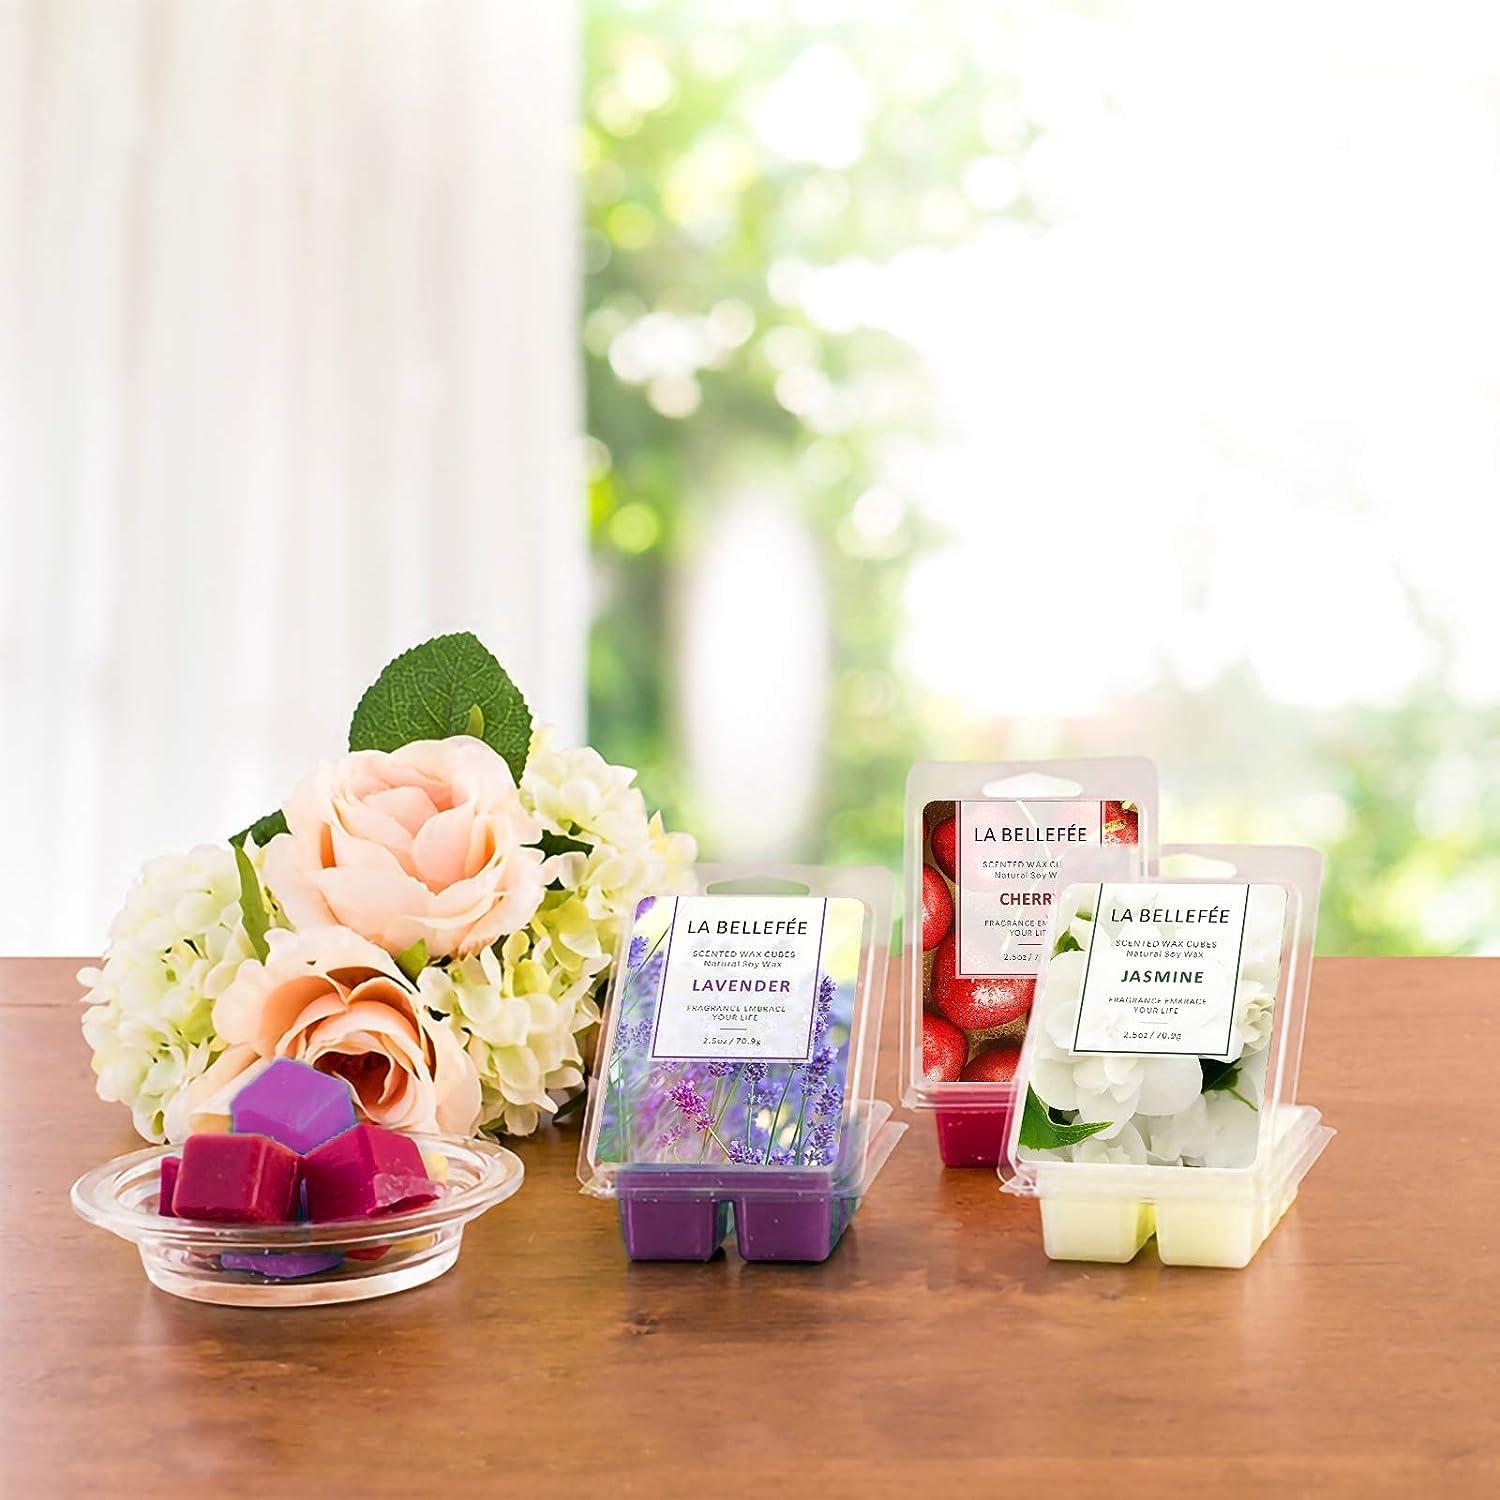 LA BELLEFE Wax Melts Wax Cubes, Natural Soy Wax Cubes Candle Melts, Scented  Wax Melts for Wax Warmer Mothers Day Gifts Decor, Floral of Rose, Lavender,  Jasmine, Cherry for Spa Relaxing, Bath